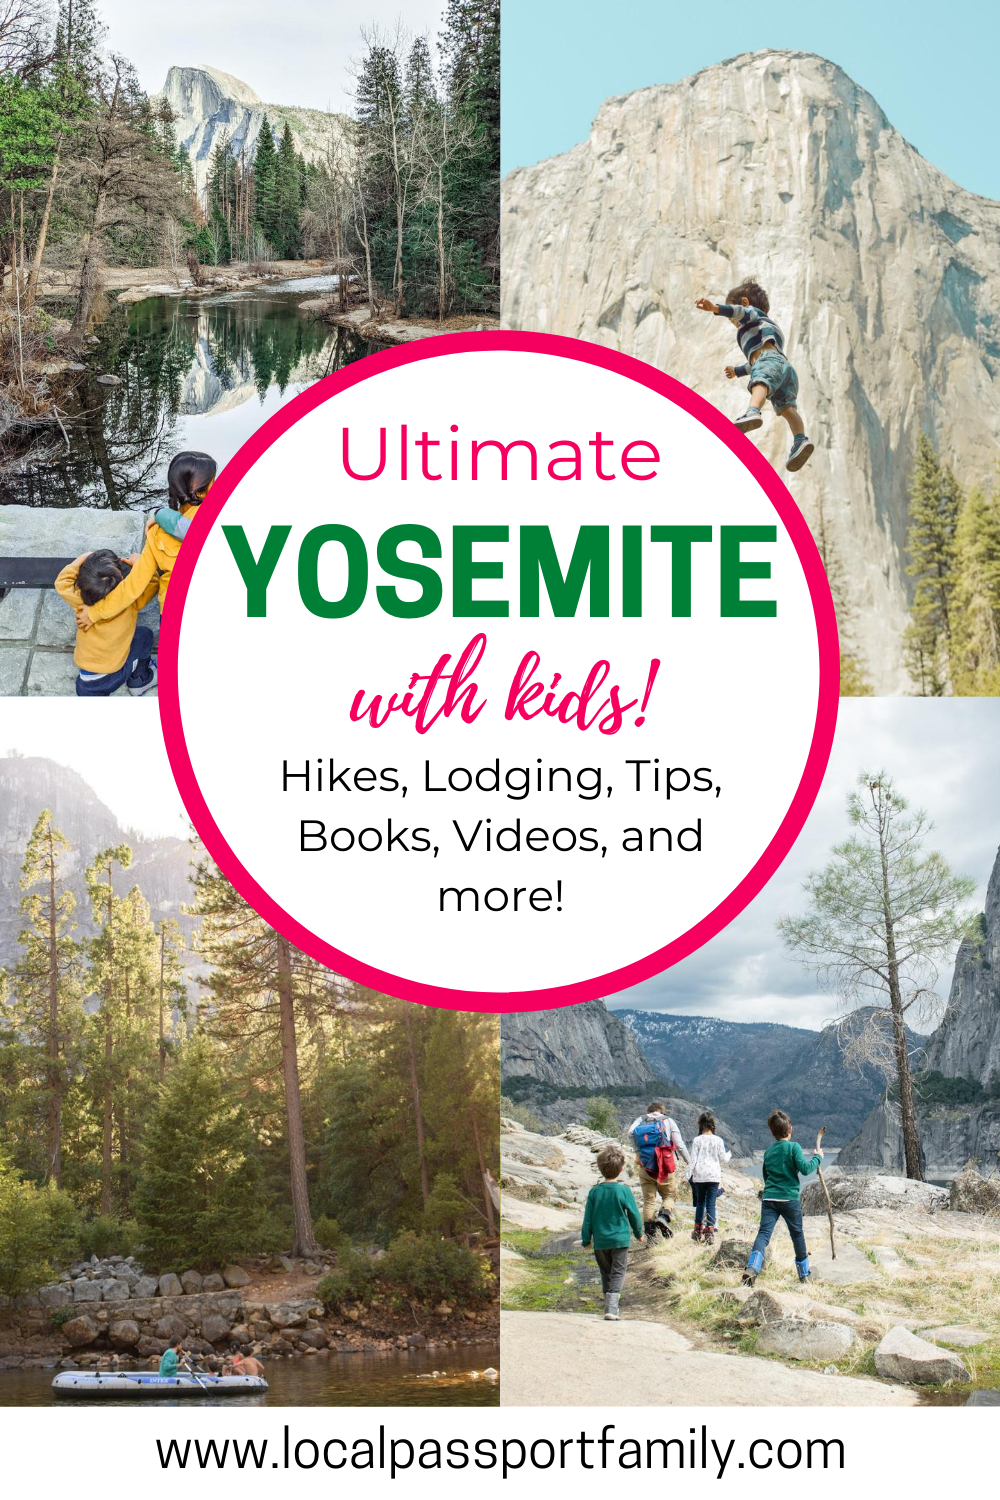 yosemite with kids travel guide and virtual tour, local passport family